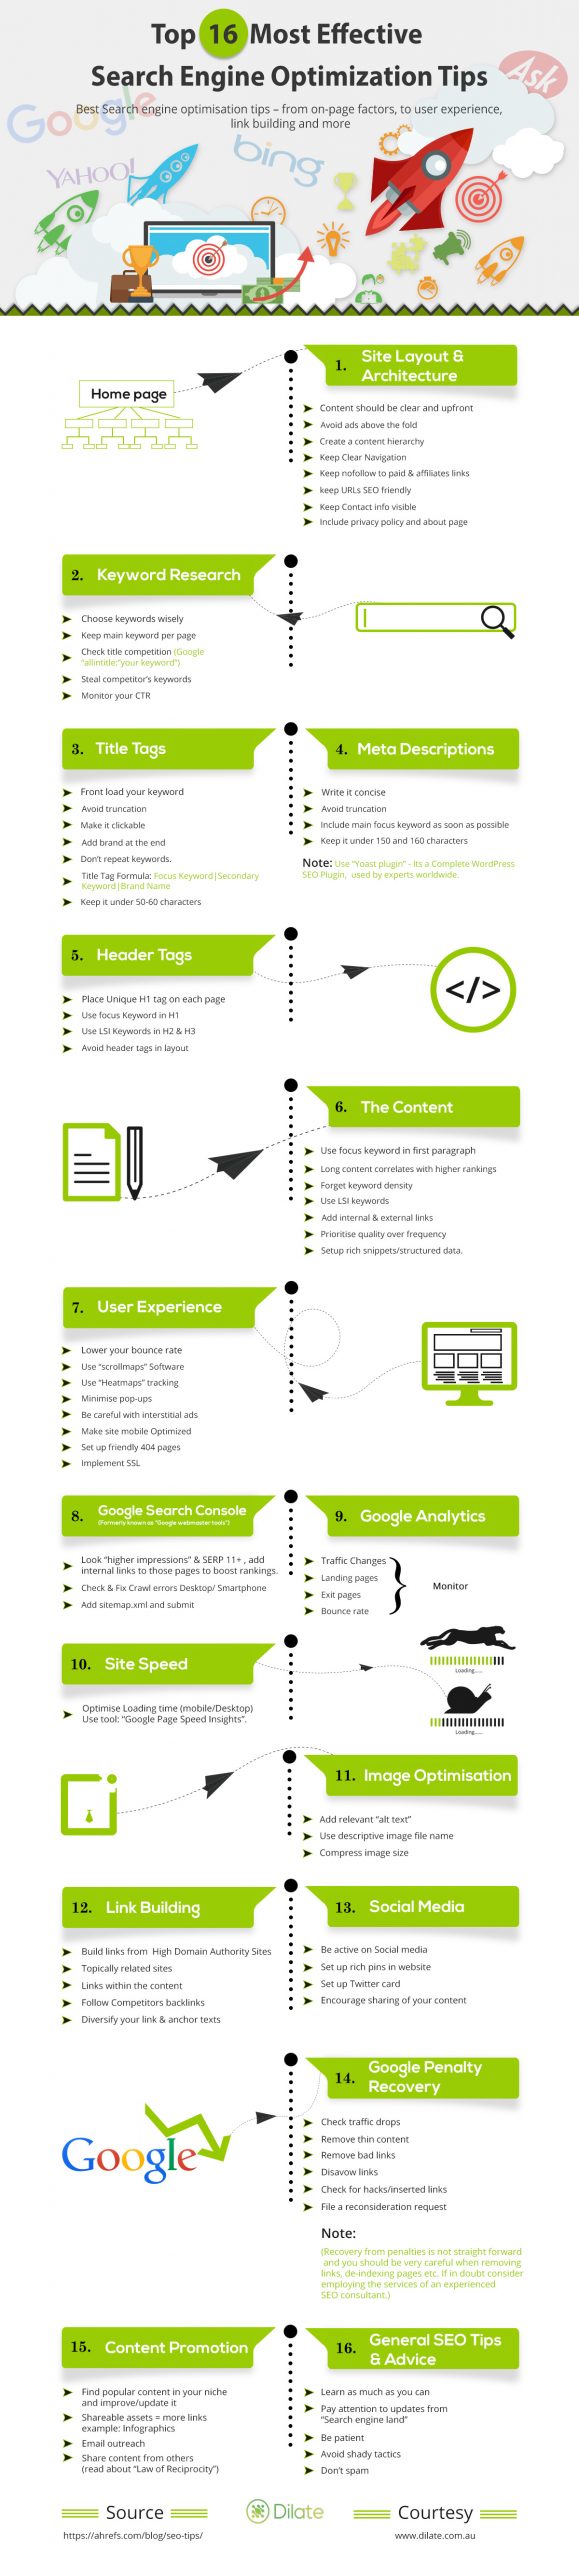 Top 16 Most effective search engine optimization tips infographic